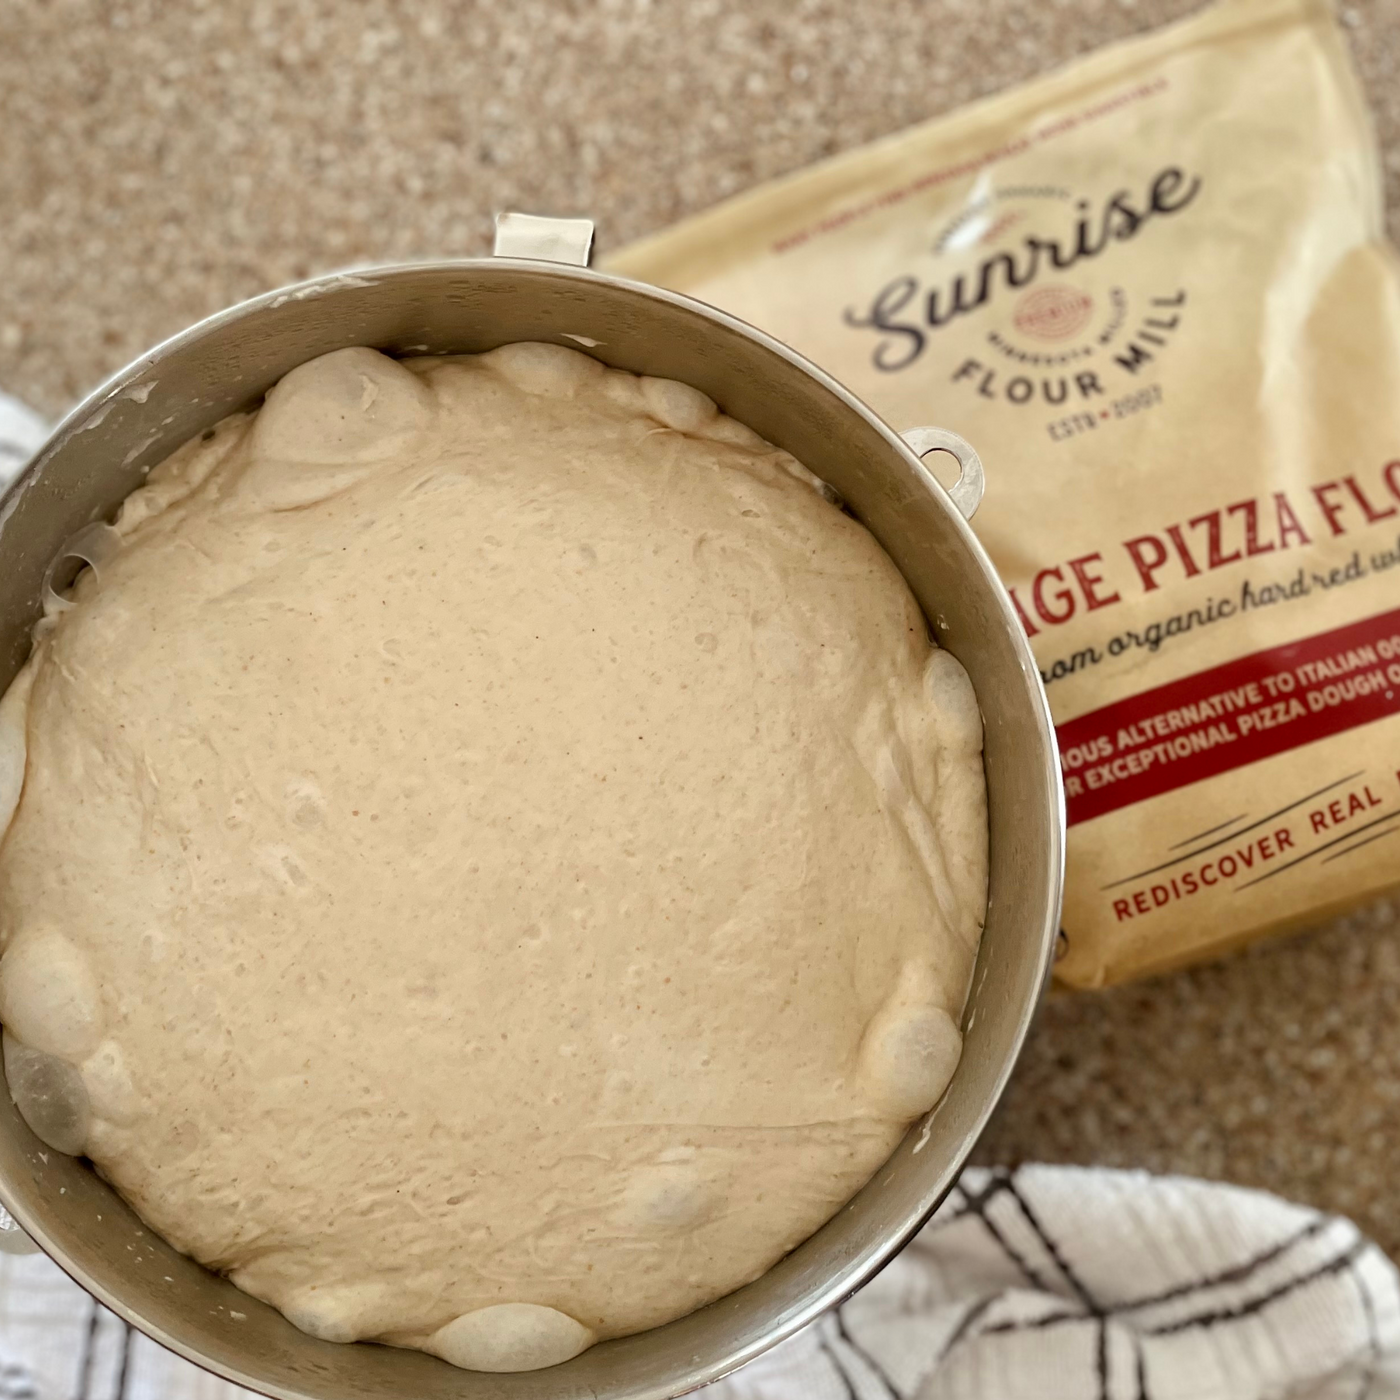 Proofed dough in a bowl next to pizza flour